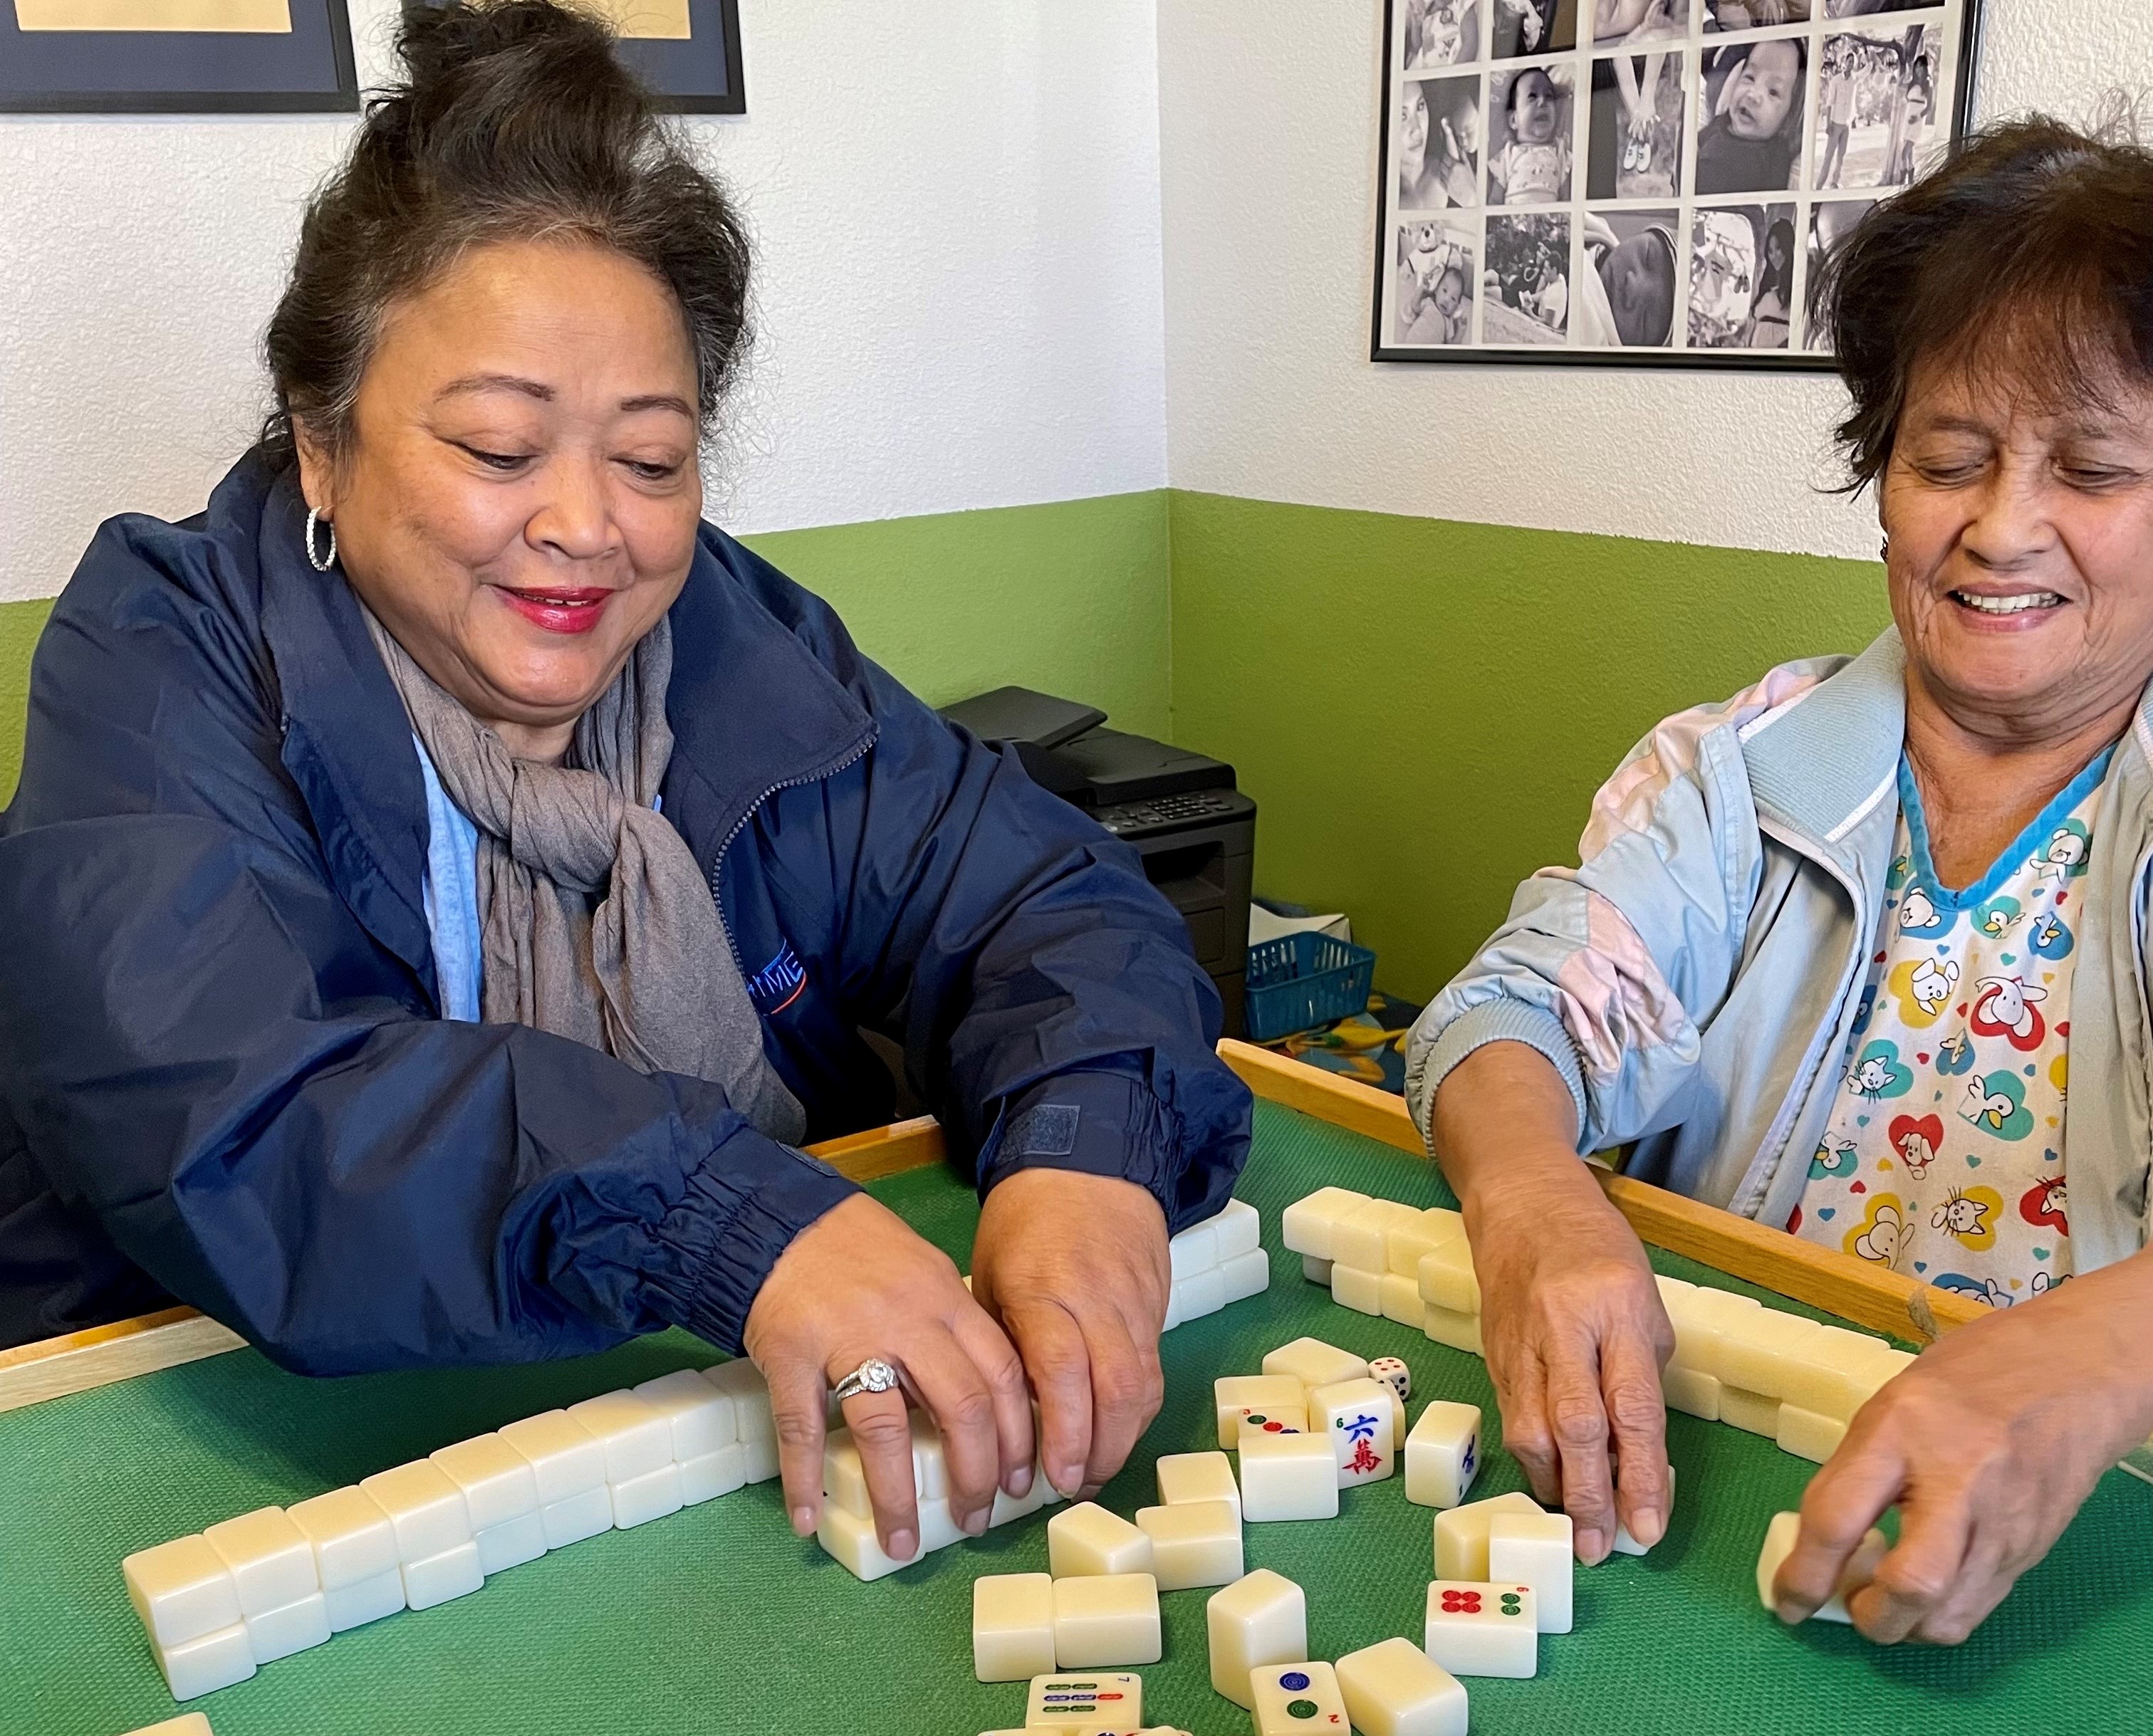 Tessie Raping spends much of her free time playing mahjong with friends and her sister Maxima (right).